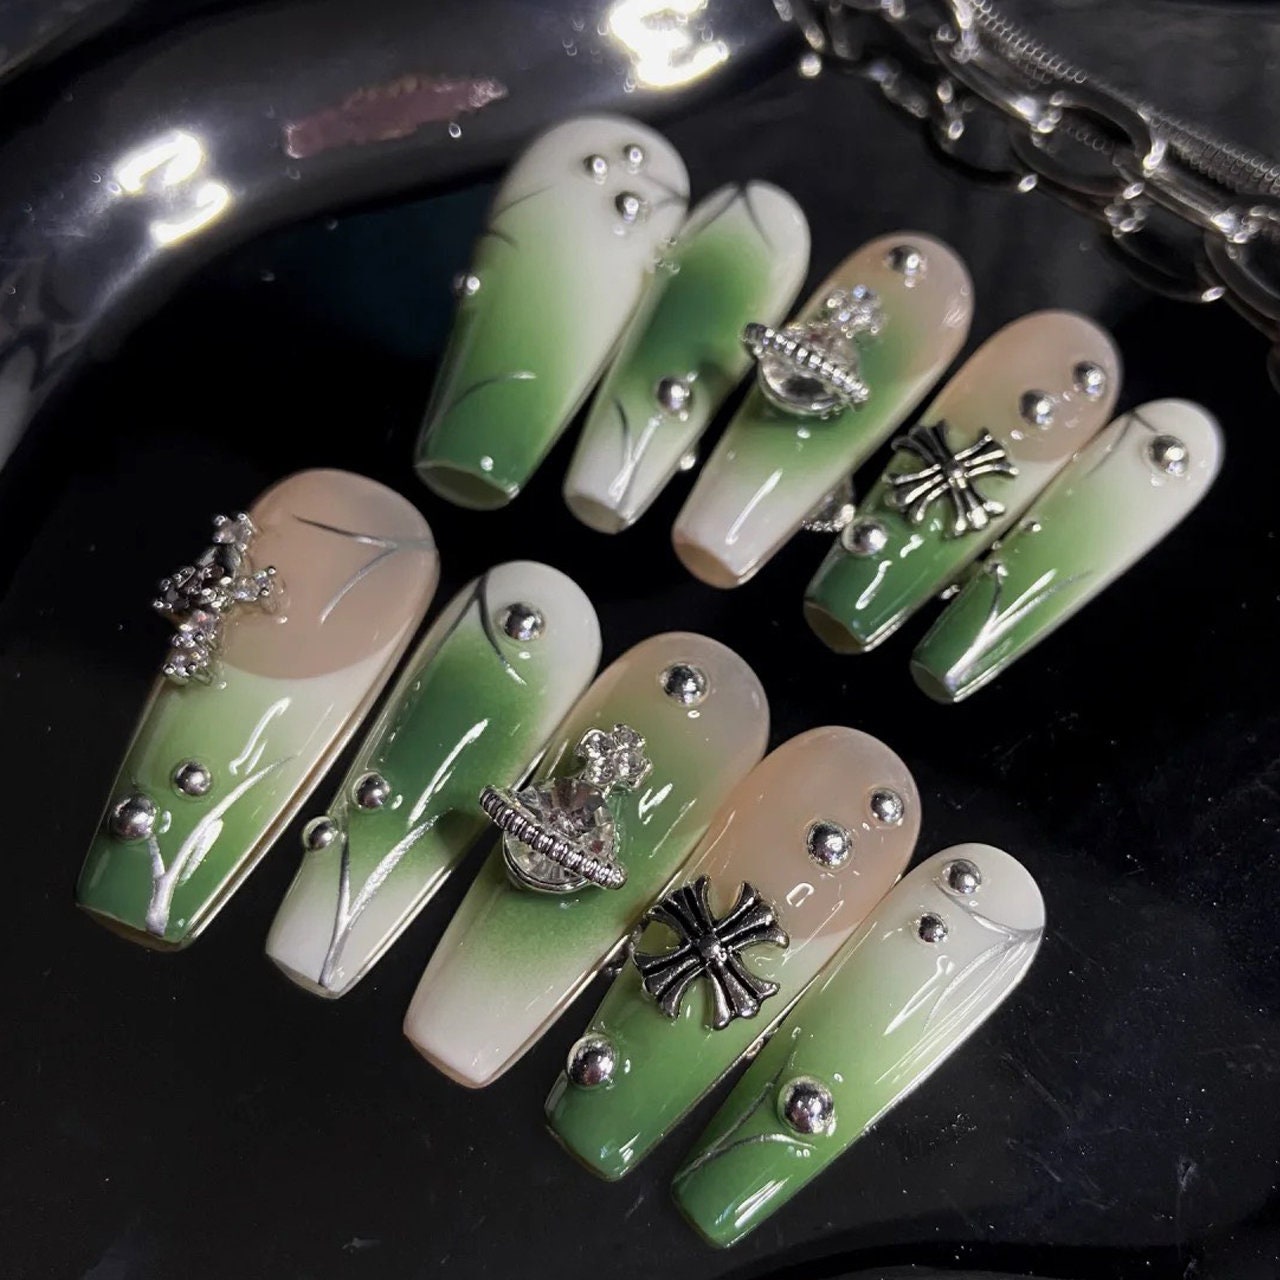 SILVER PLANET Press on Nails With Charms Gems 